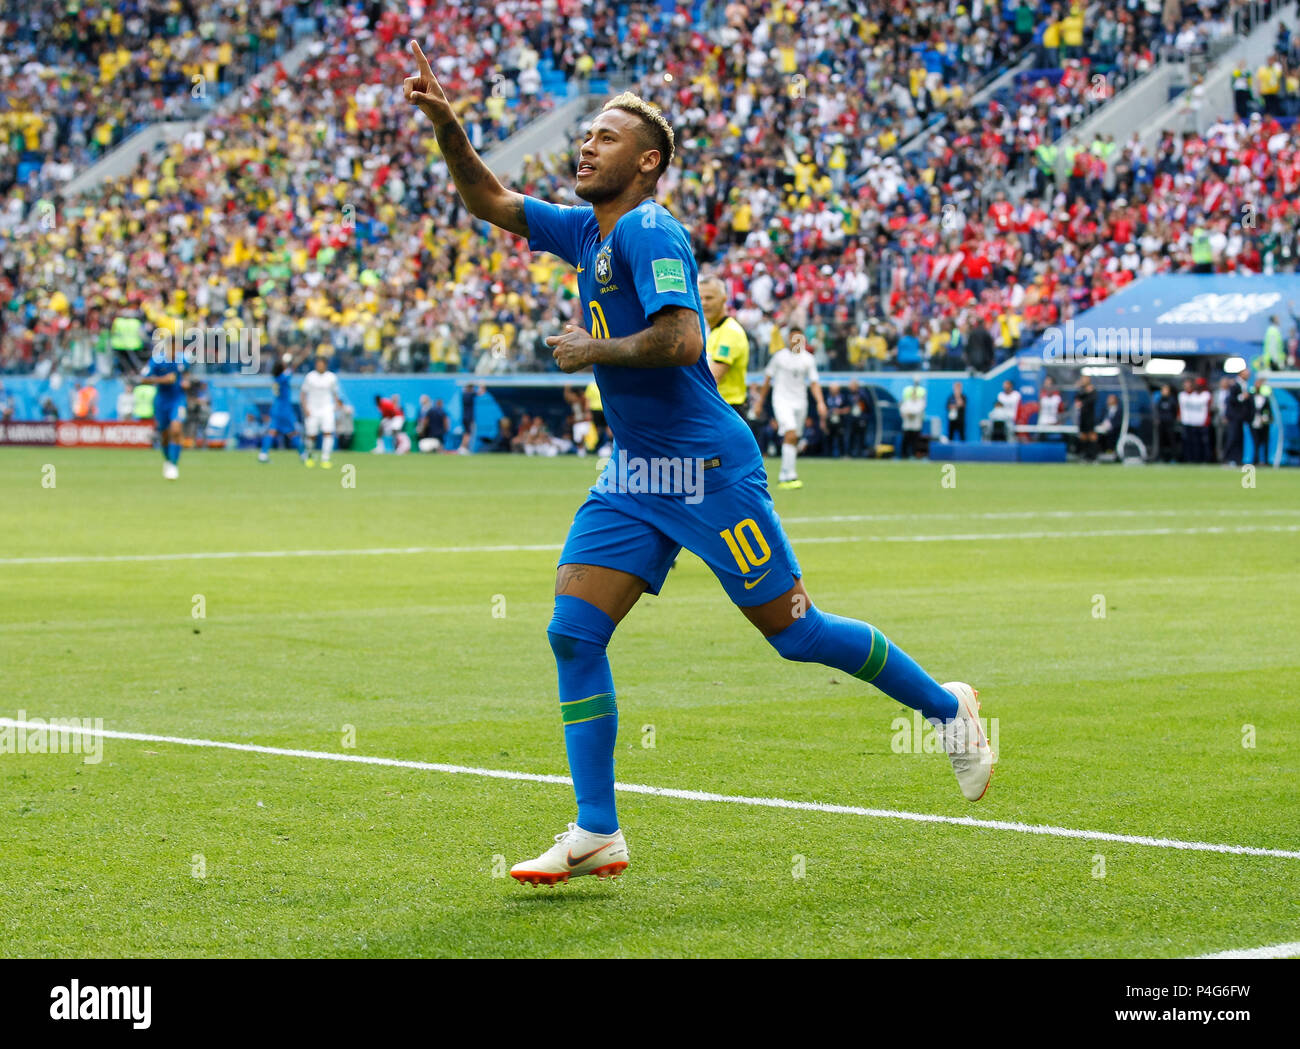 St Petersburg, Russia. 22nd June, 2018. Neymar of Brazil celebrates after scoring his side's second goal to make the score 2-0 during the 2018 FIFA World Cup Group E match between Brazil and Costa Rica at Saint Petersburg Stadium on June 22nd 2018 in Saint Petersburg, Russia. (Photo by Daniel Chesterton/phcimages.com) Credit: PHC Images/Alamy Live News Stock Photo